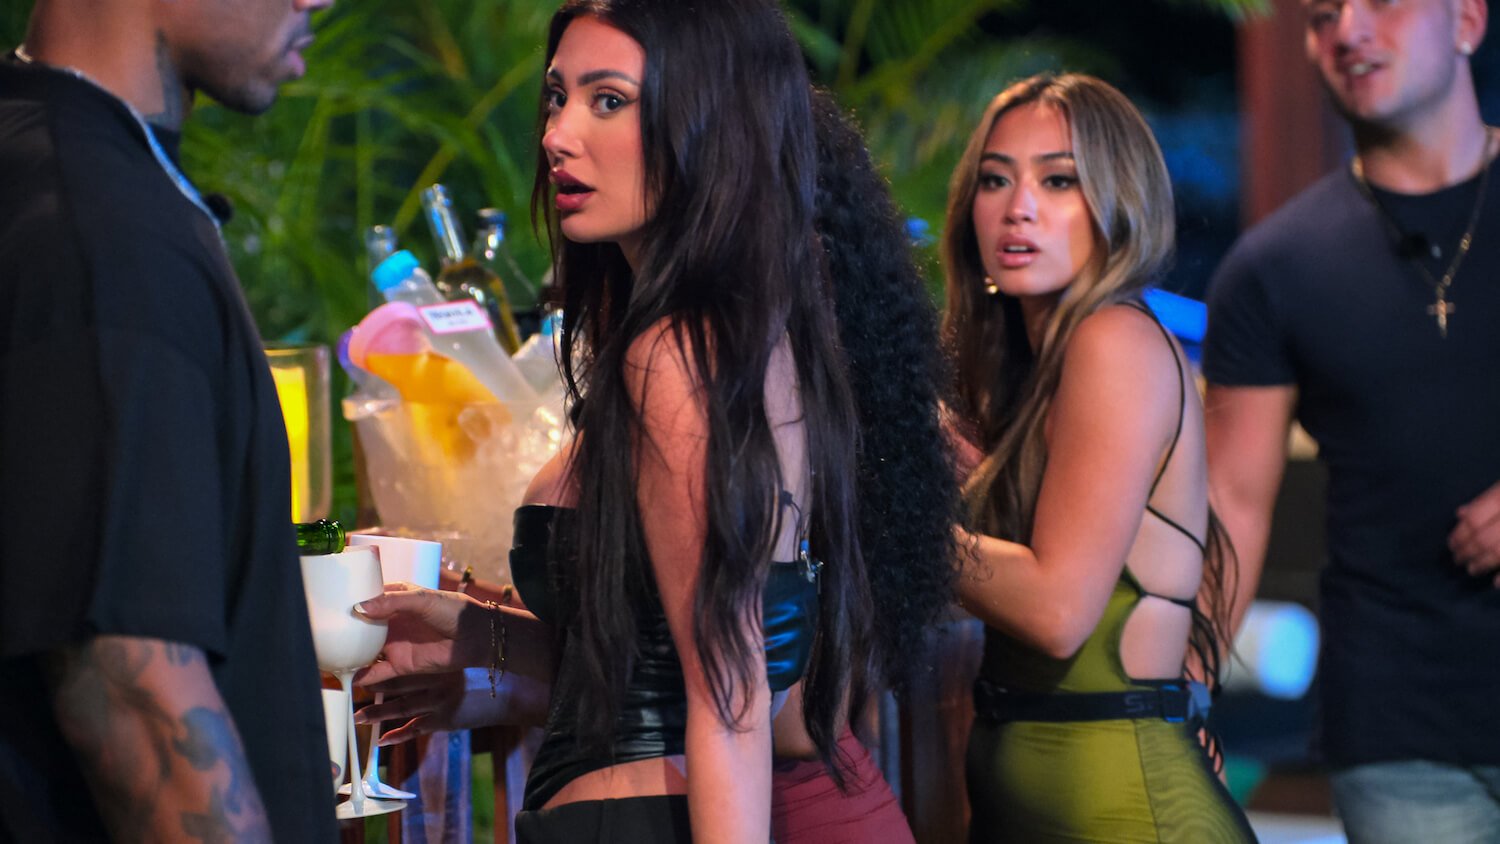 'Perfect Match' stars Savannah and Francesca continue to battle it out on social media. The two are seen here standing next to the villa bar in a production still from the series.